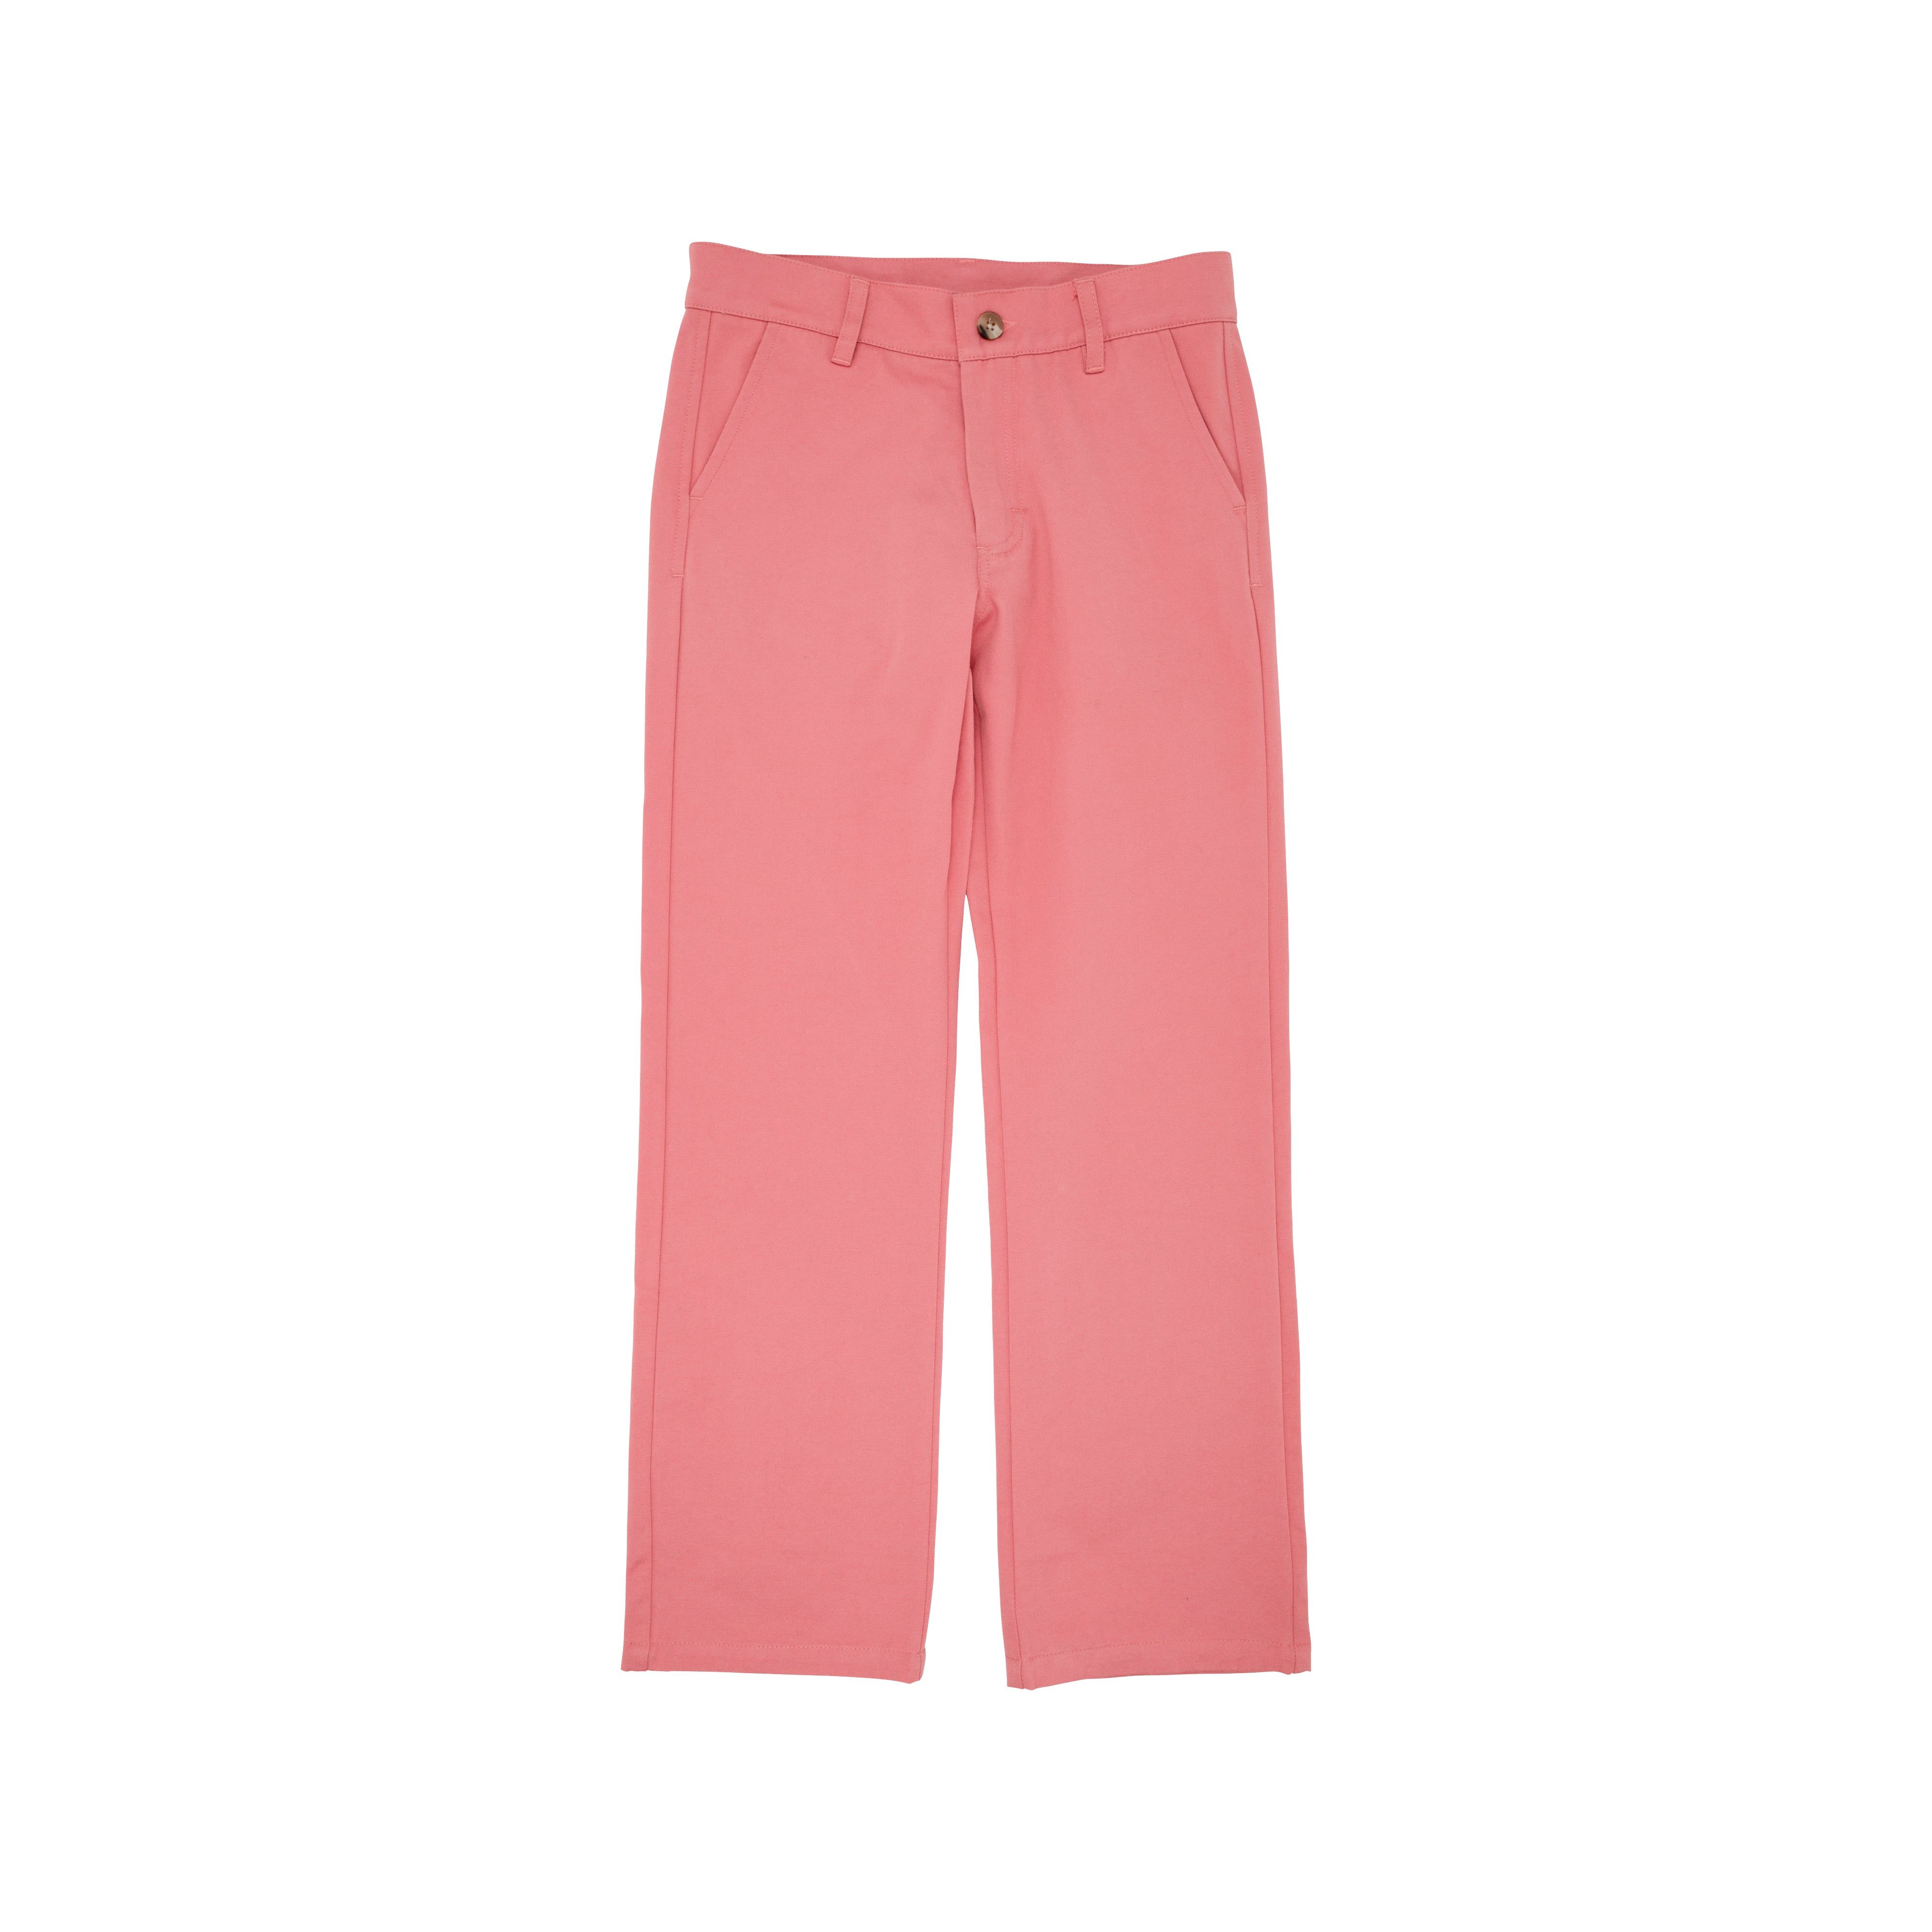 Prep School Pants - Nantucket Red with Nantucket Red Stork | The Beaufort Bonnet Company